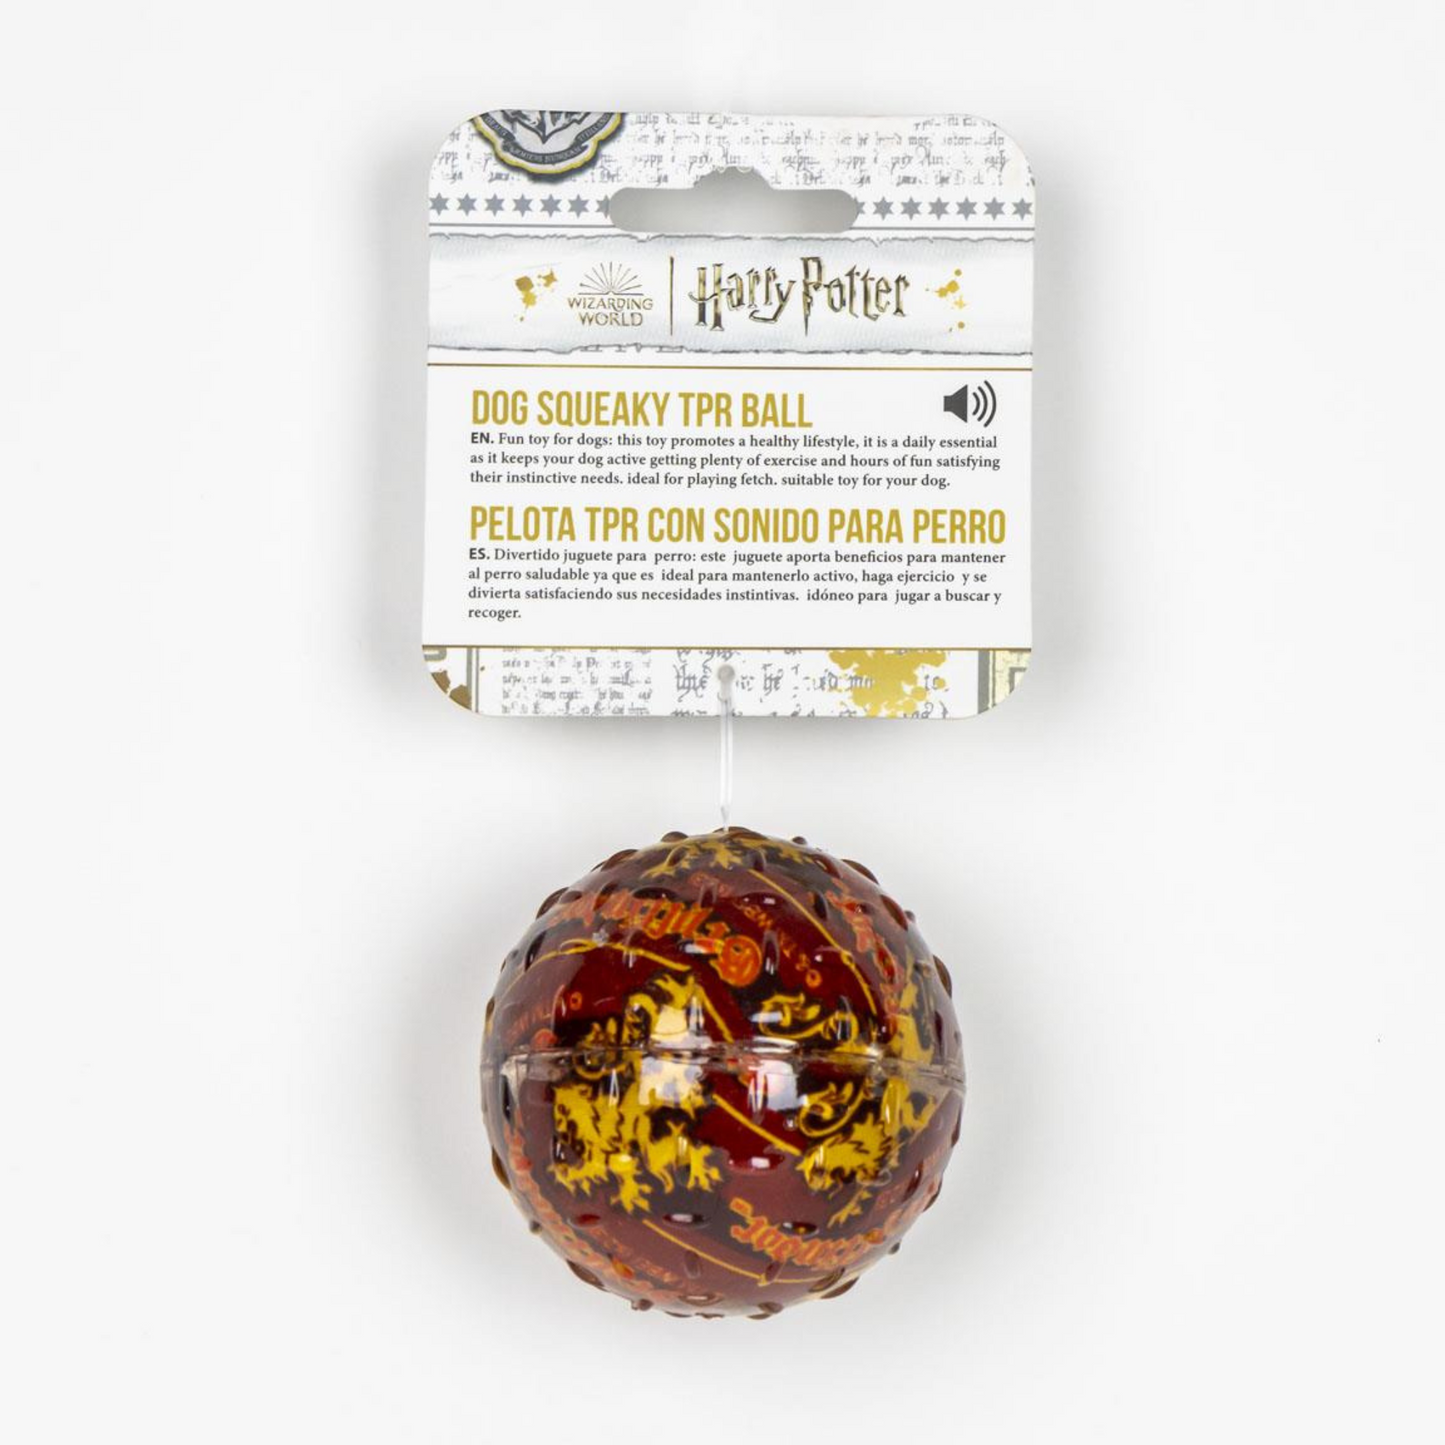 Harry Potter Squeaky Dog Ball Toy